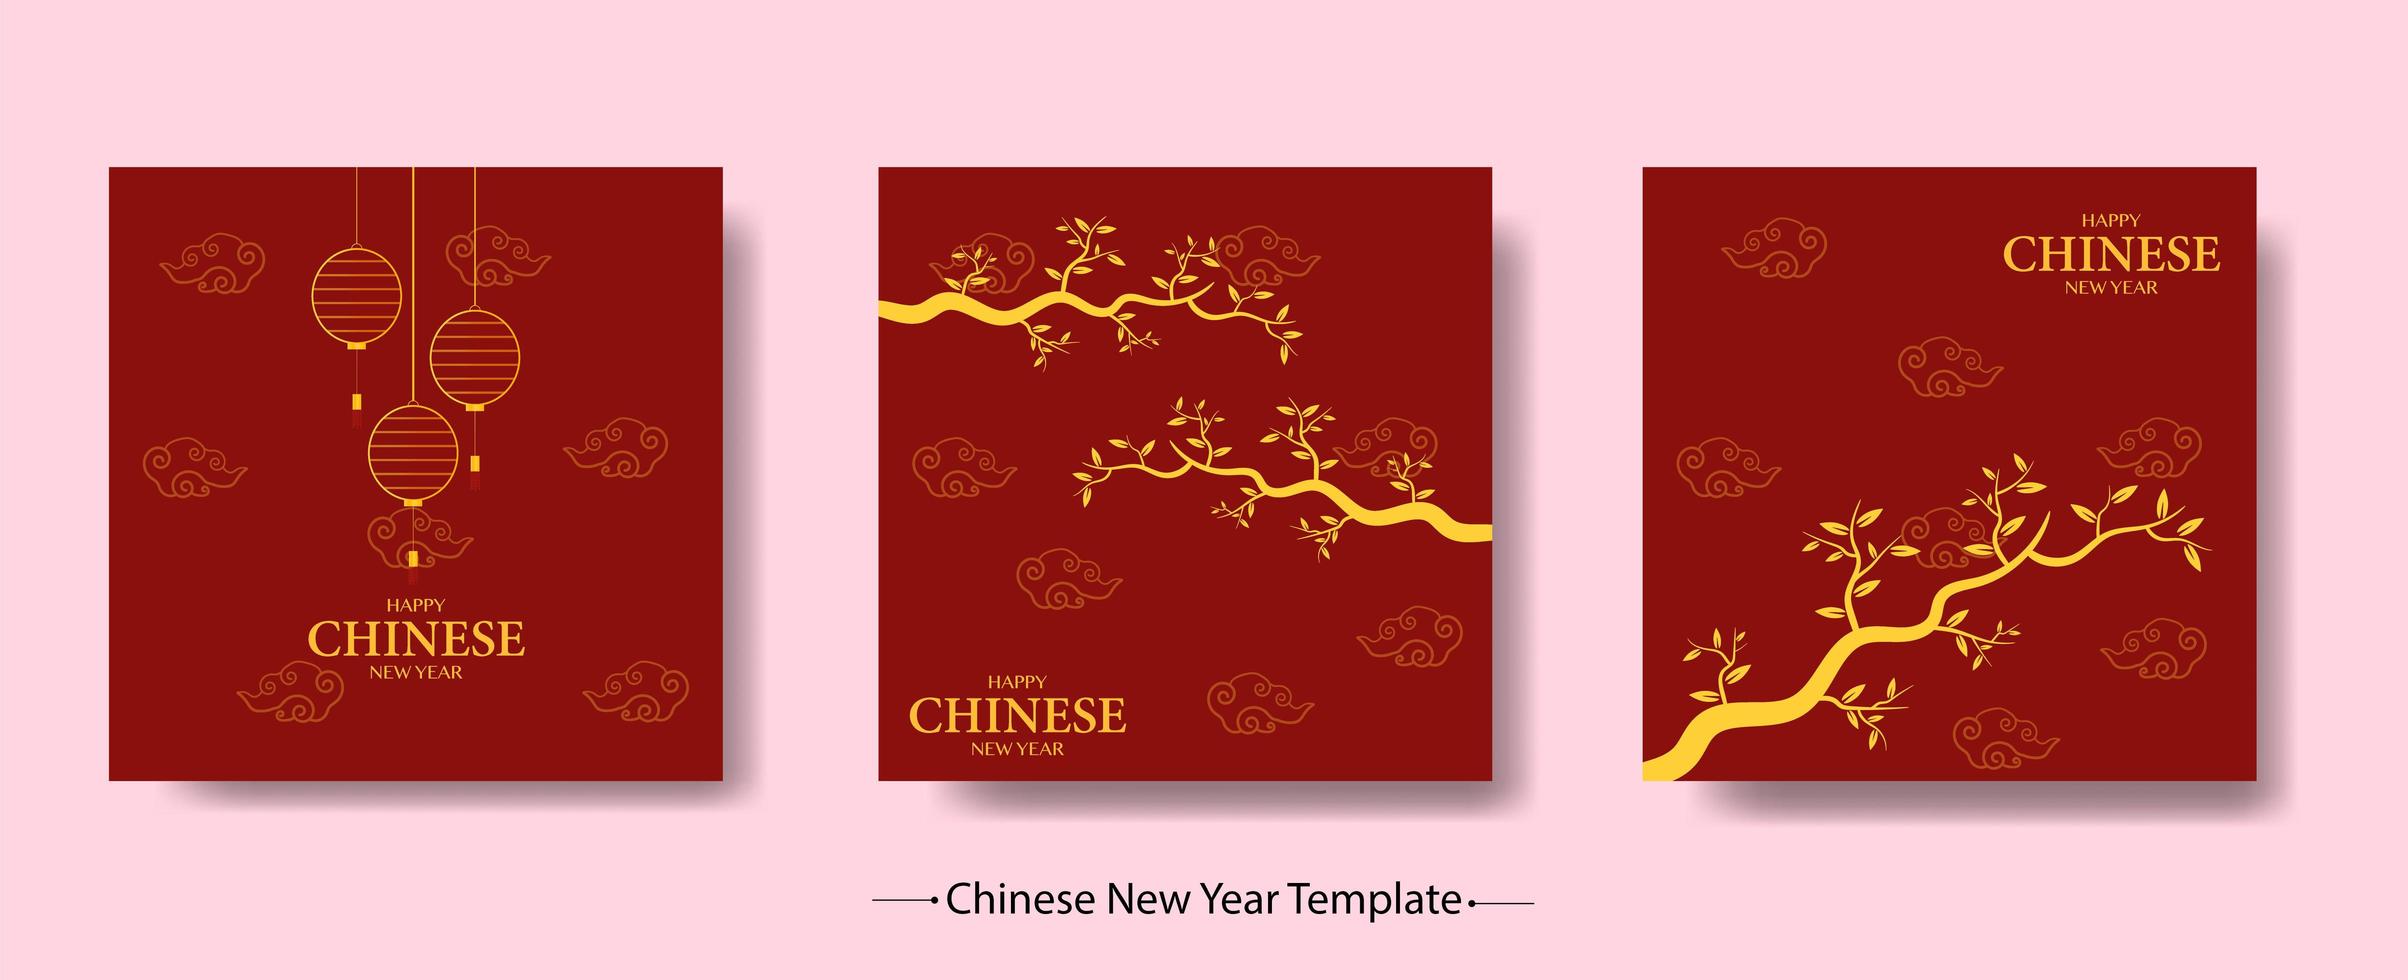 Happy Chinese New Year Template Bundle vector